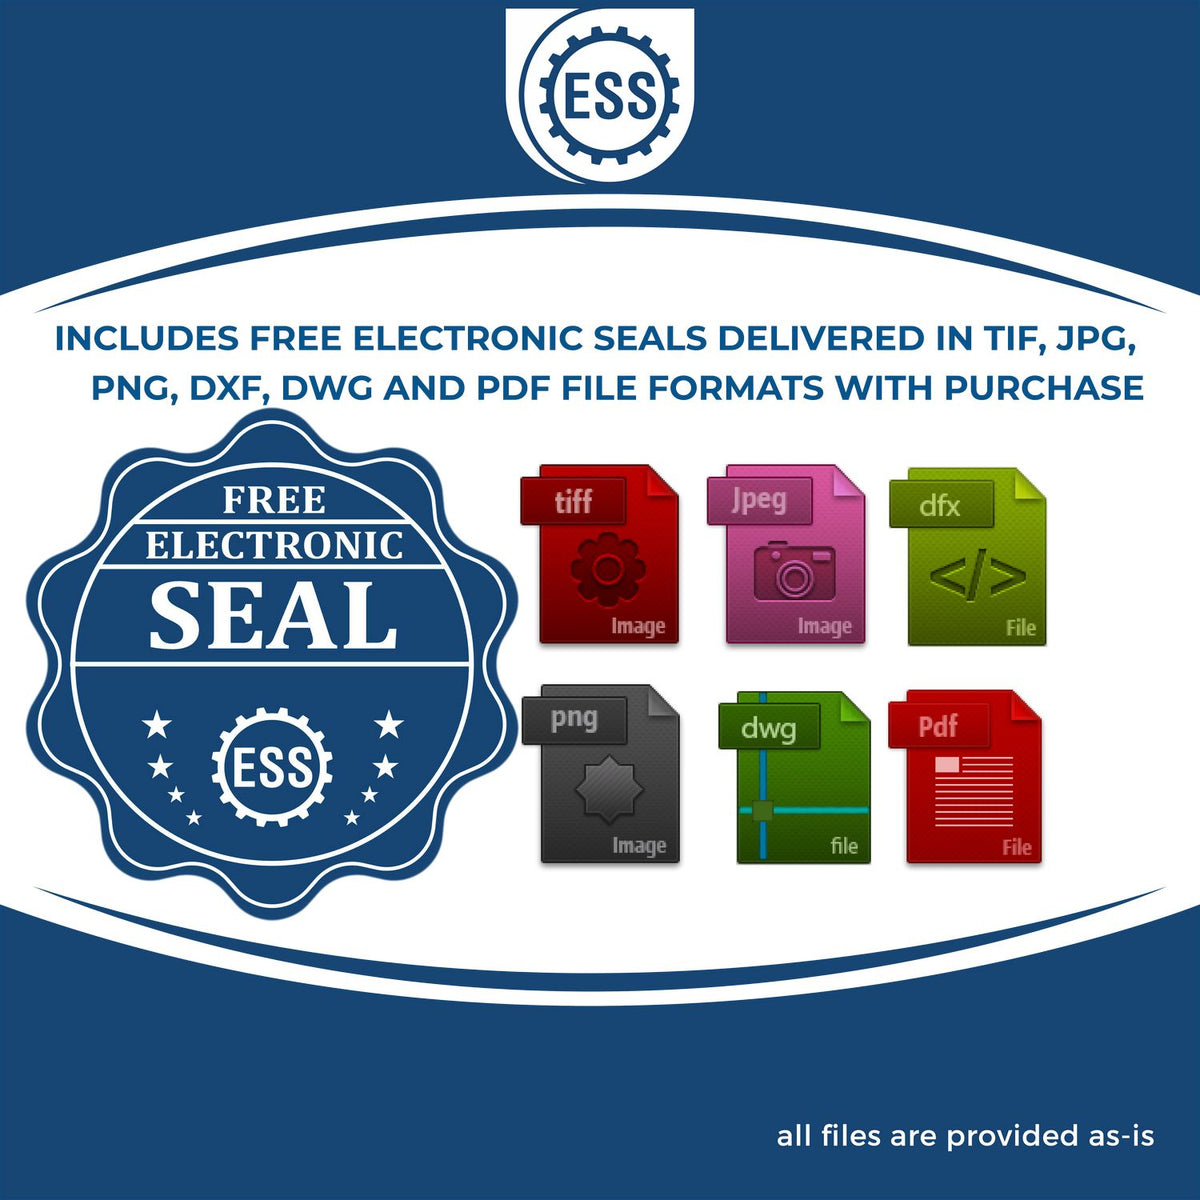 An infographic for the free electronic seal for the Slim Pre-Inked Maine Professional Engineer Seal Stamp illustrating the different file type icons such as DXF, DWG, TIF, JPG and PNG.